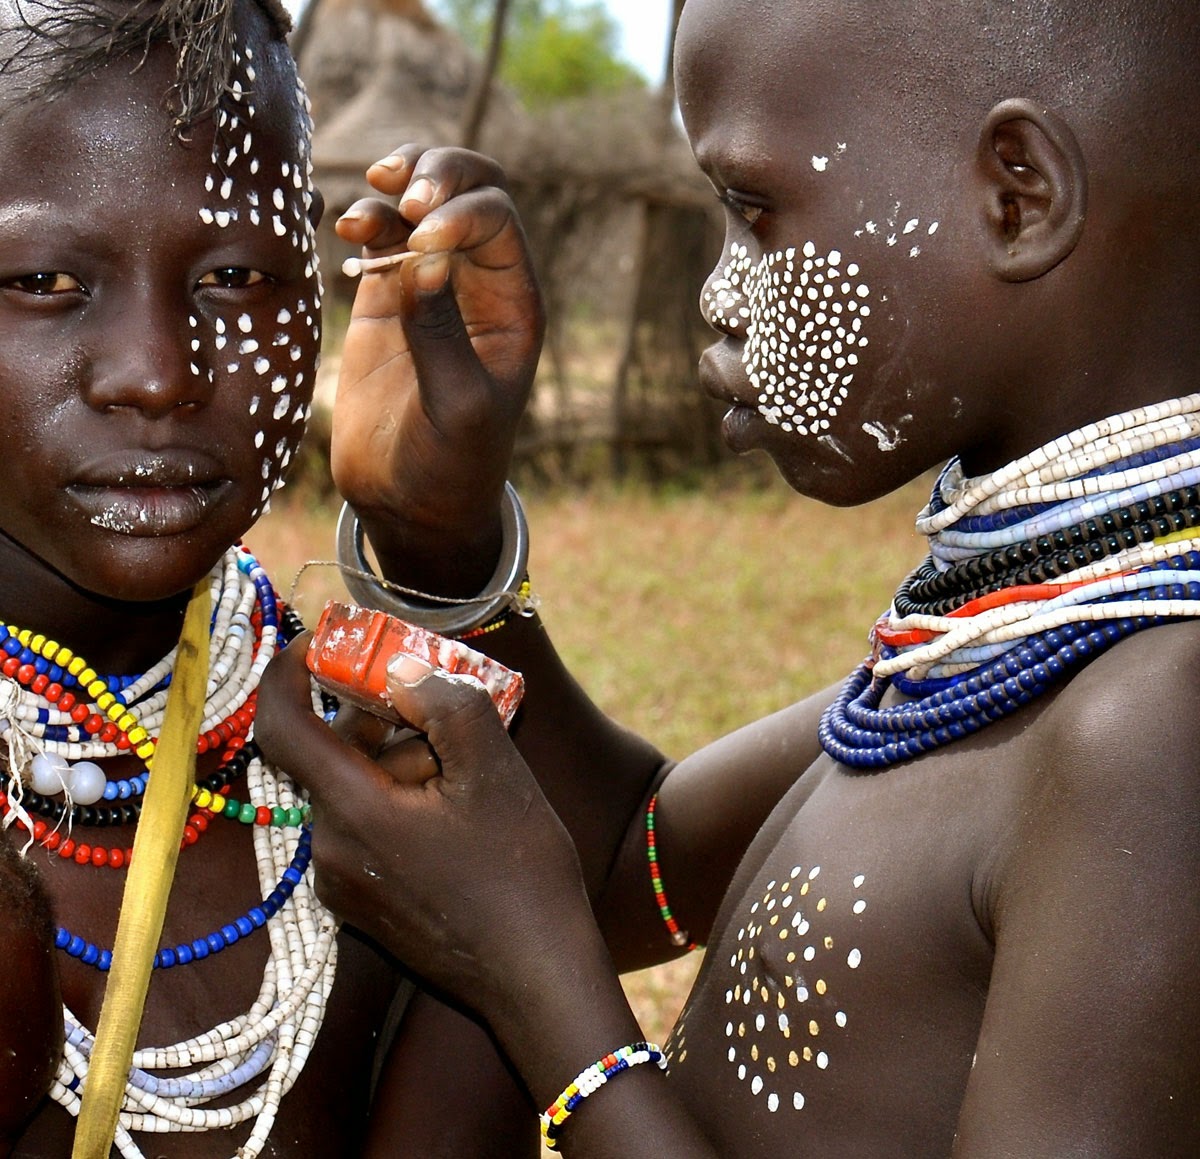 6. Tribal Make-Up Artist - 10 Highlights from the 2015 Nat Geo Traveler Photo Contest